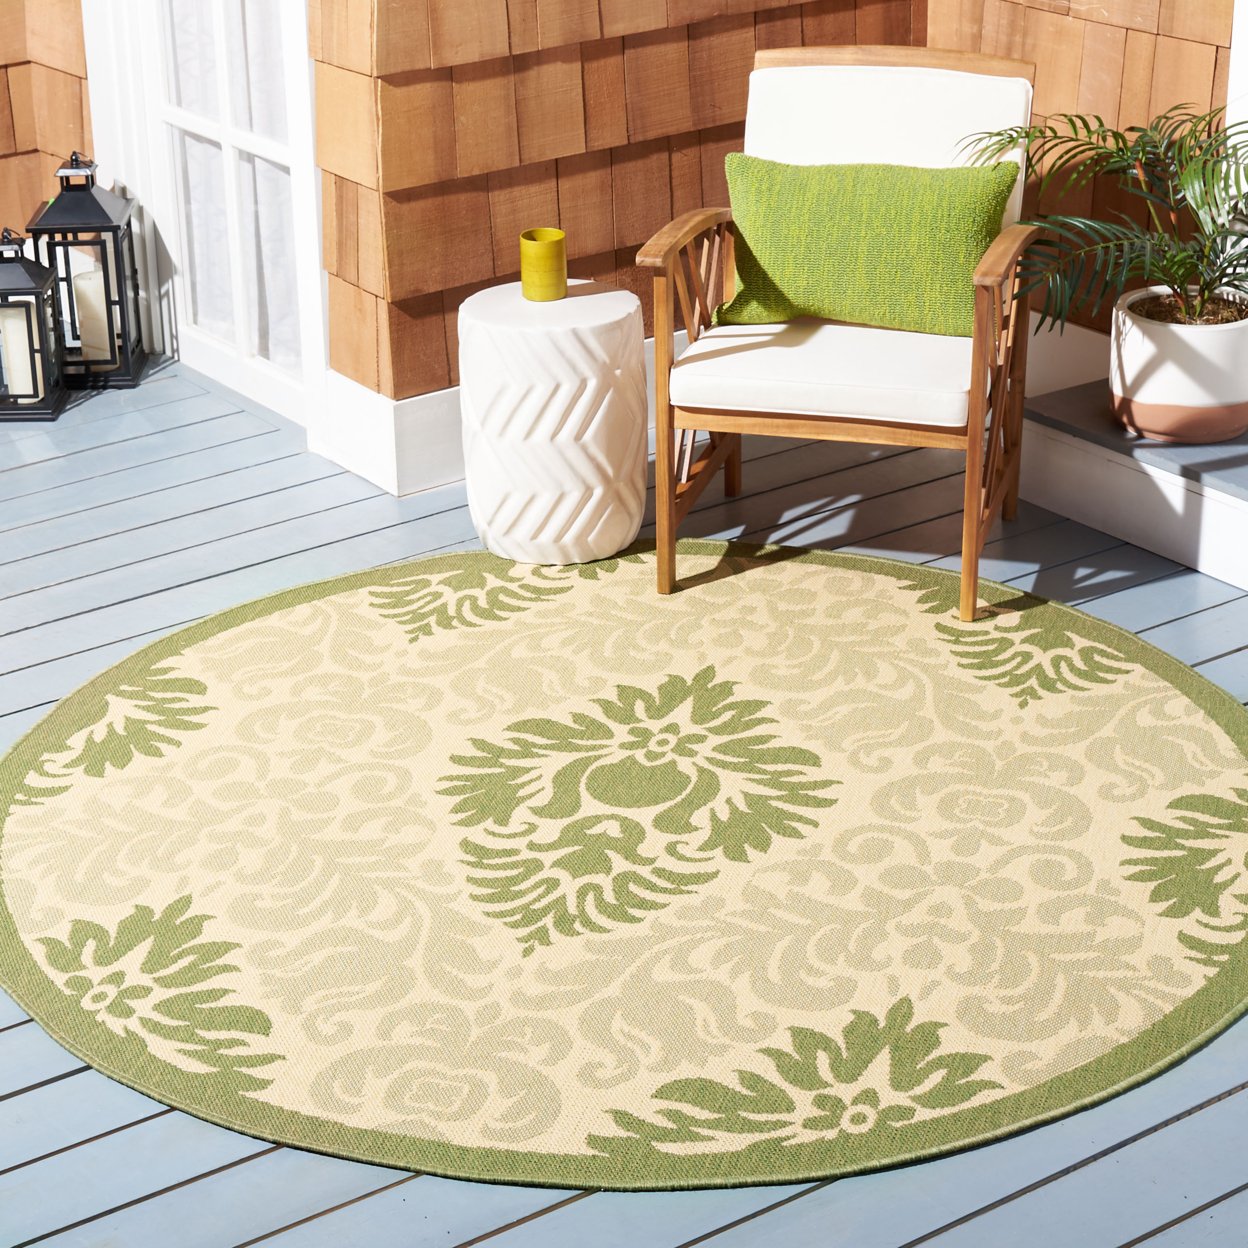 SAFAVIEH Outdoor CY2714-1E01 Courtyard Natural / Olive Rug - 8' X 11'